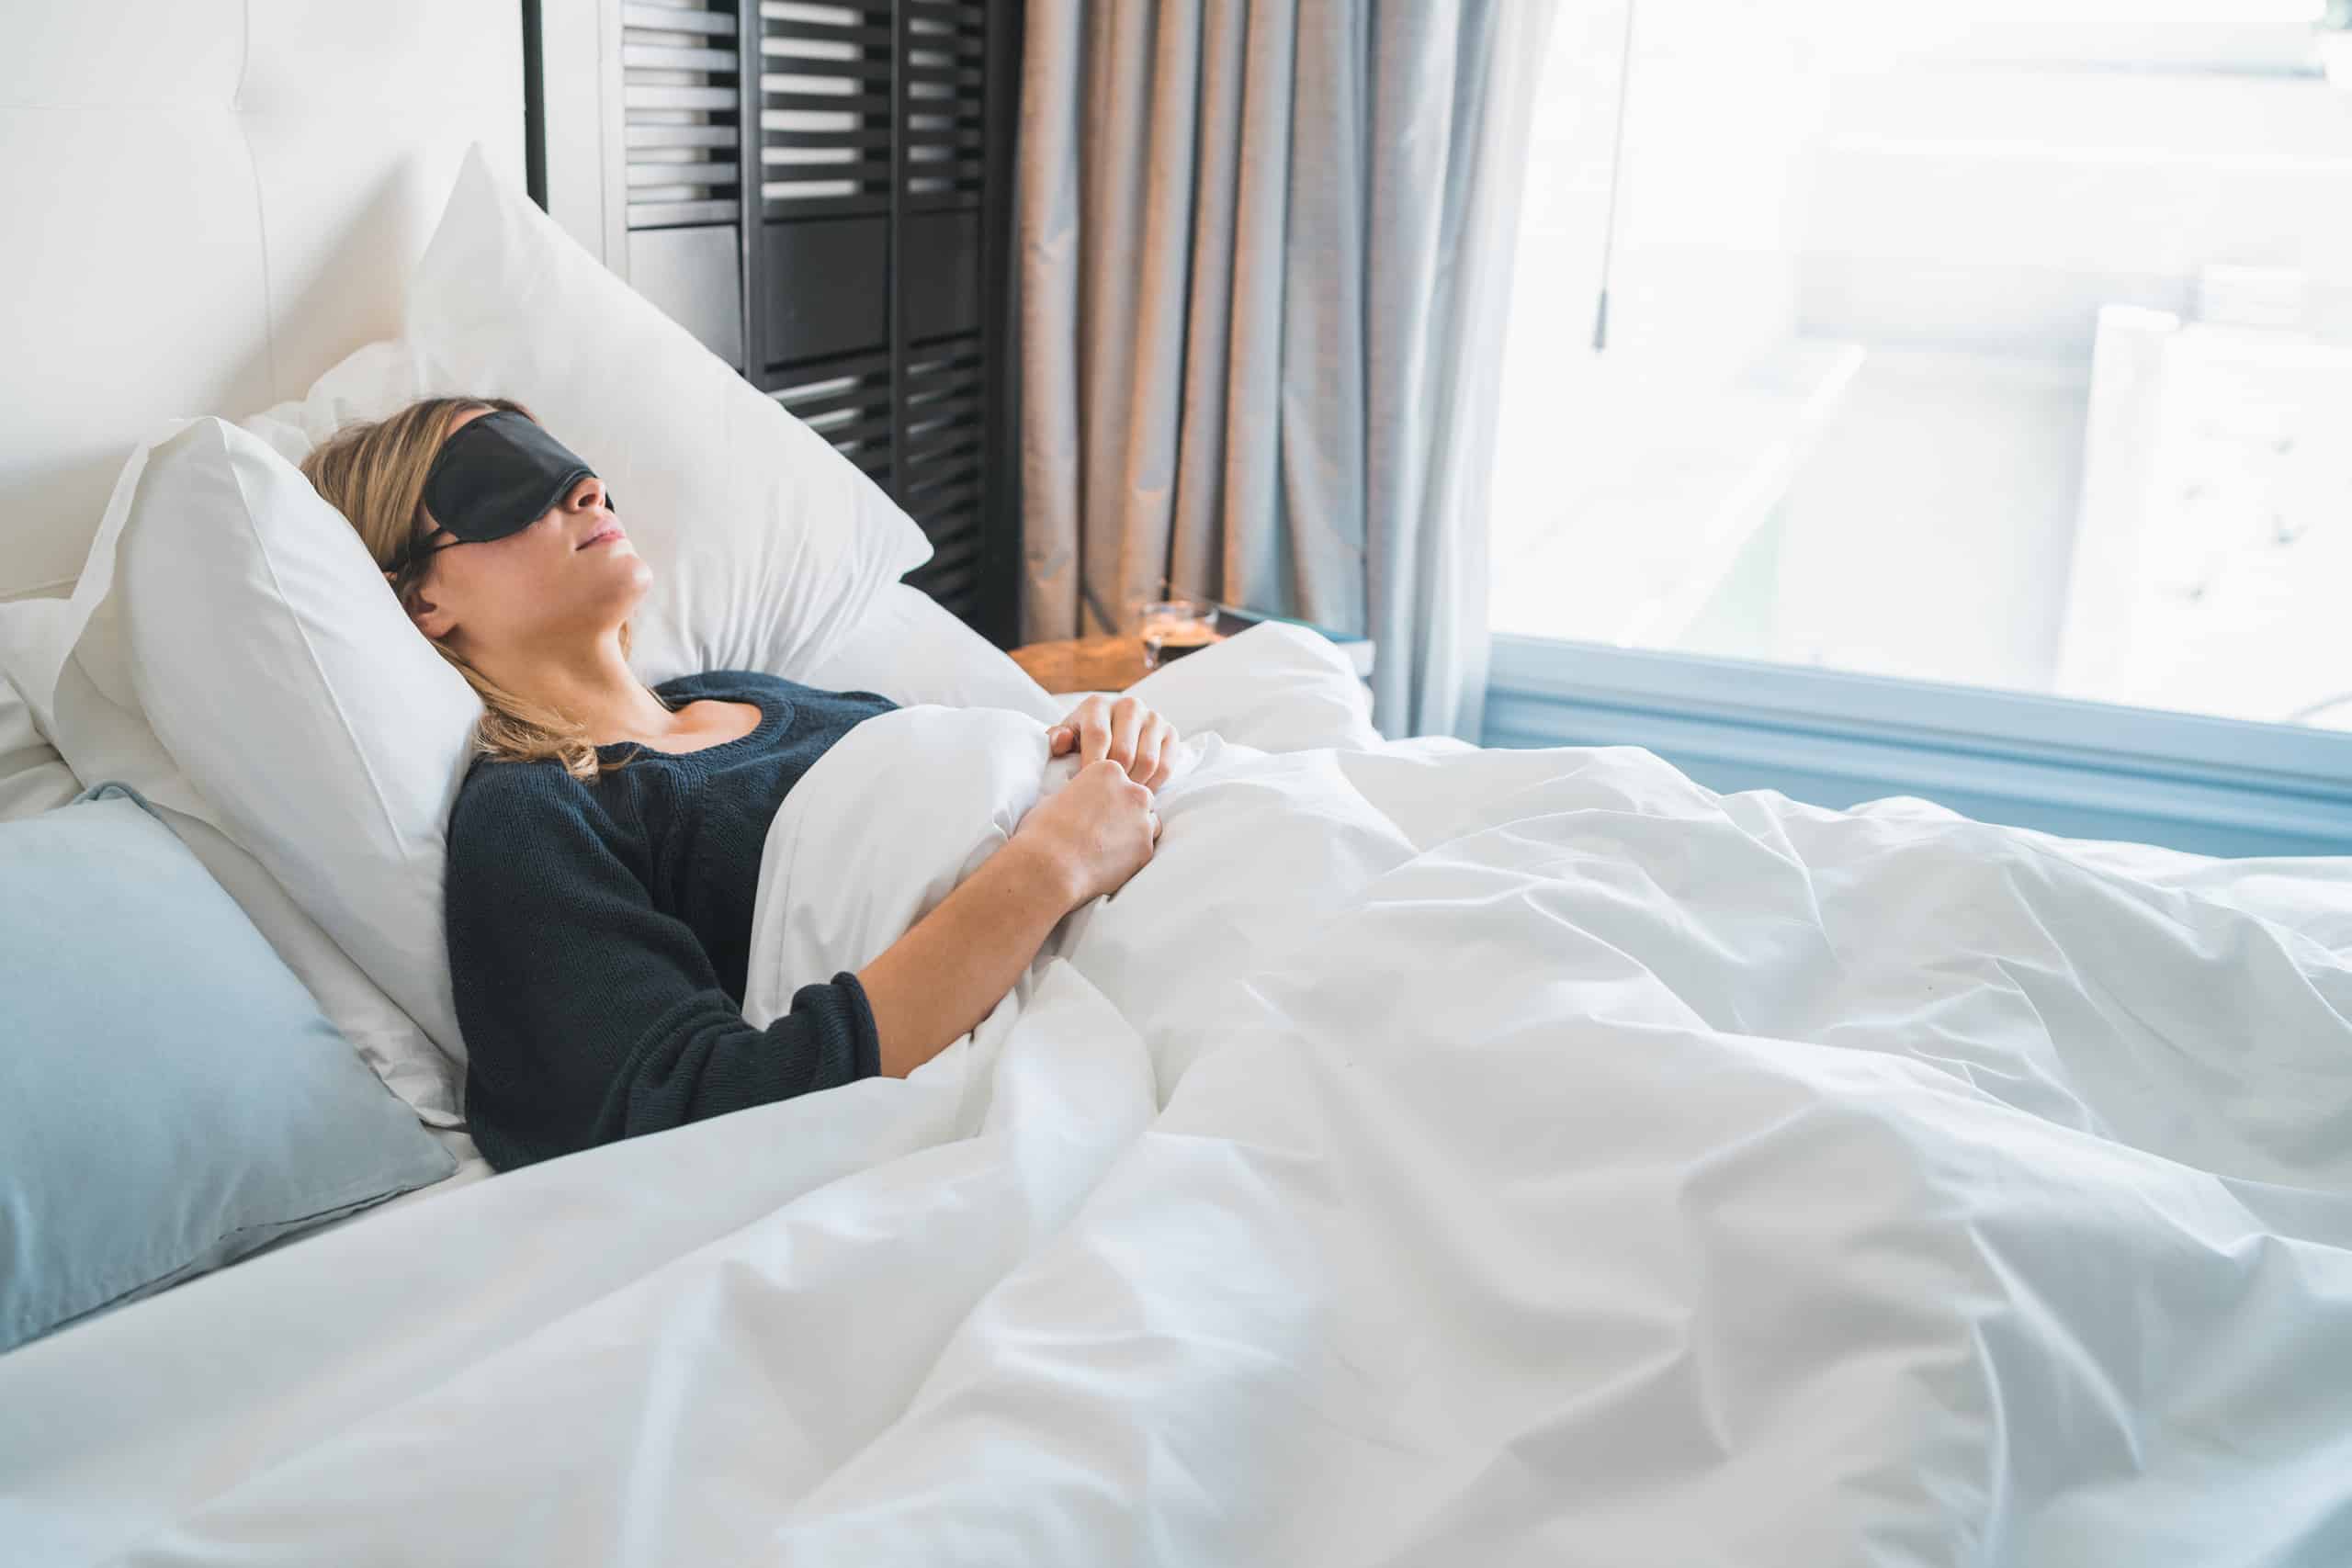 The Connection Between Sleep Quality and the Right Mattress